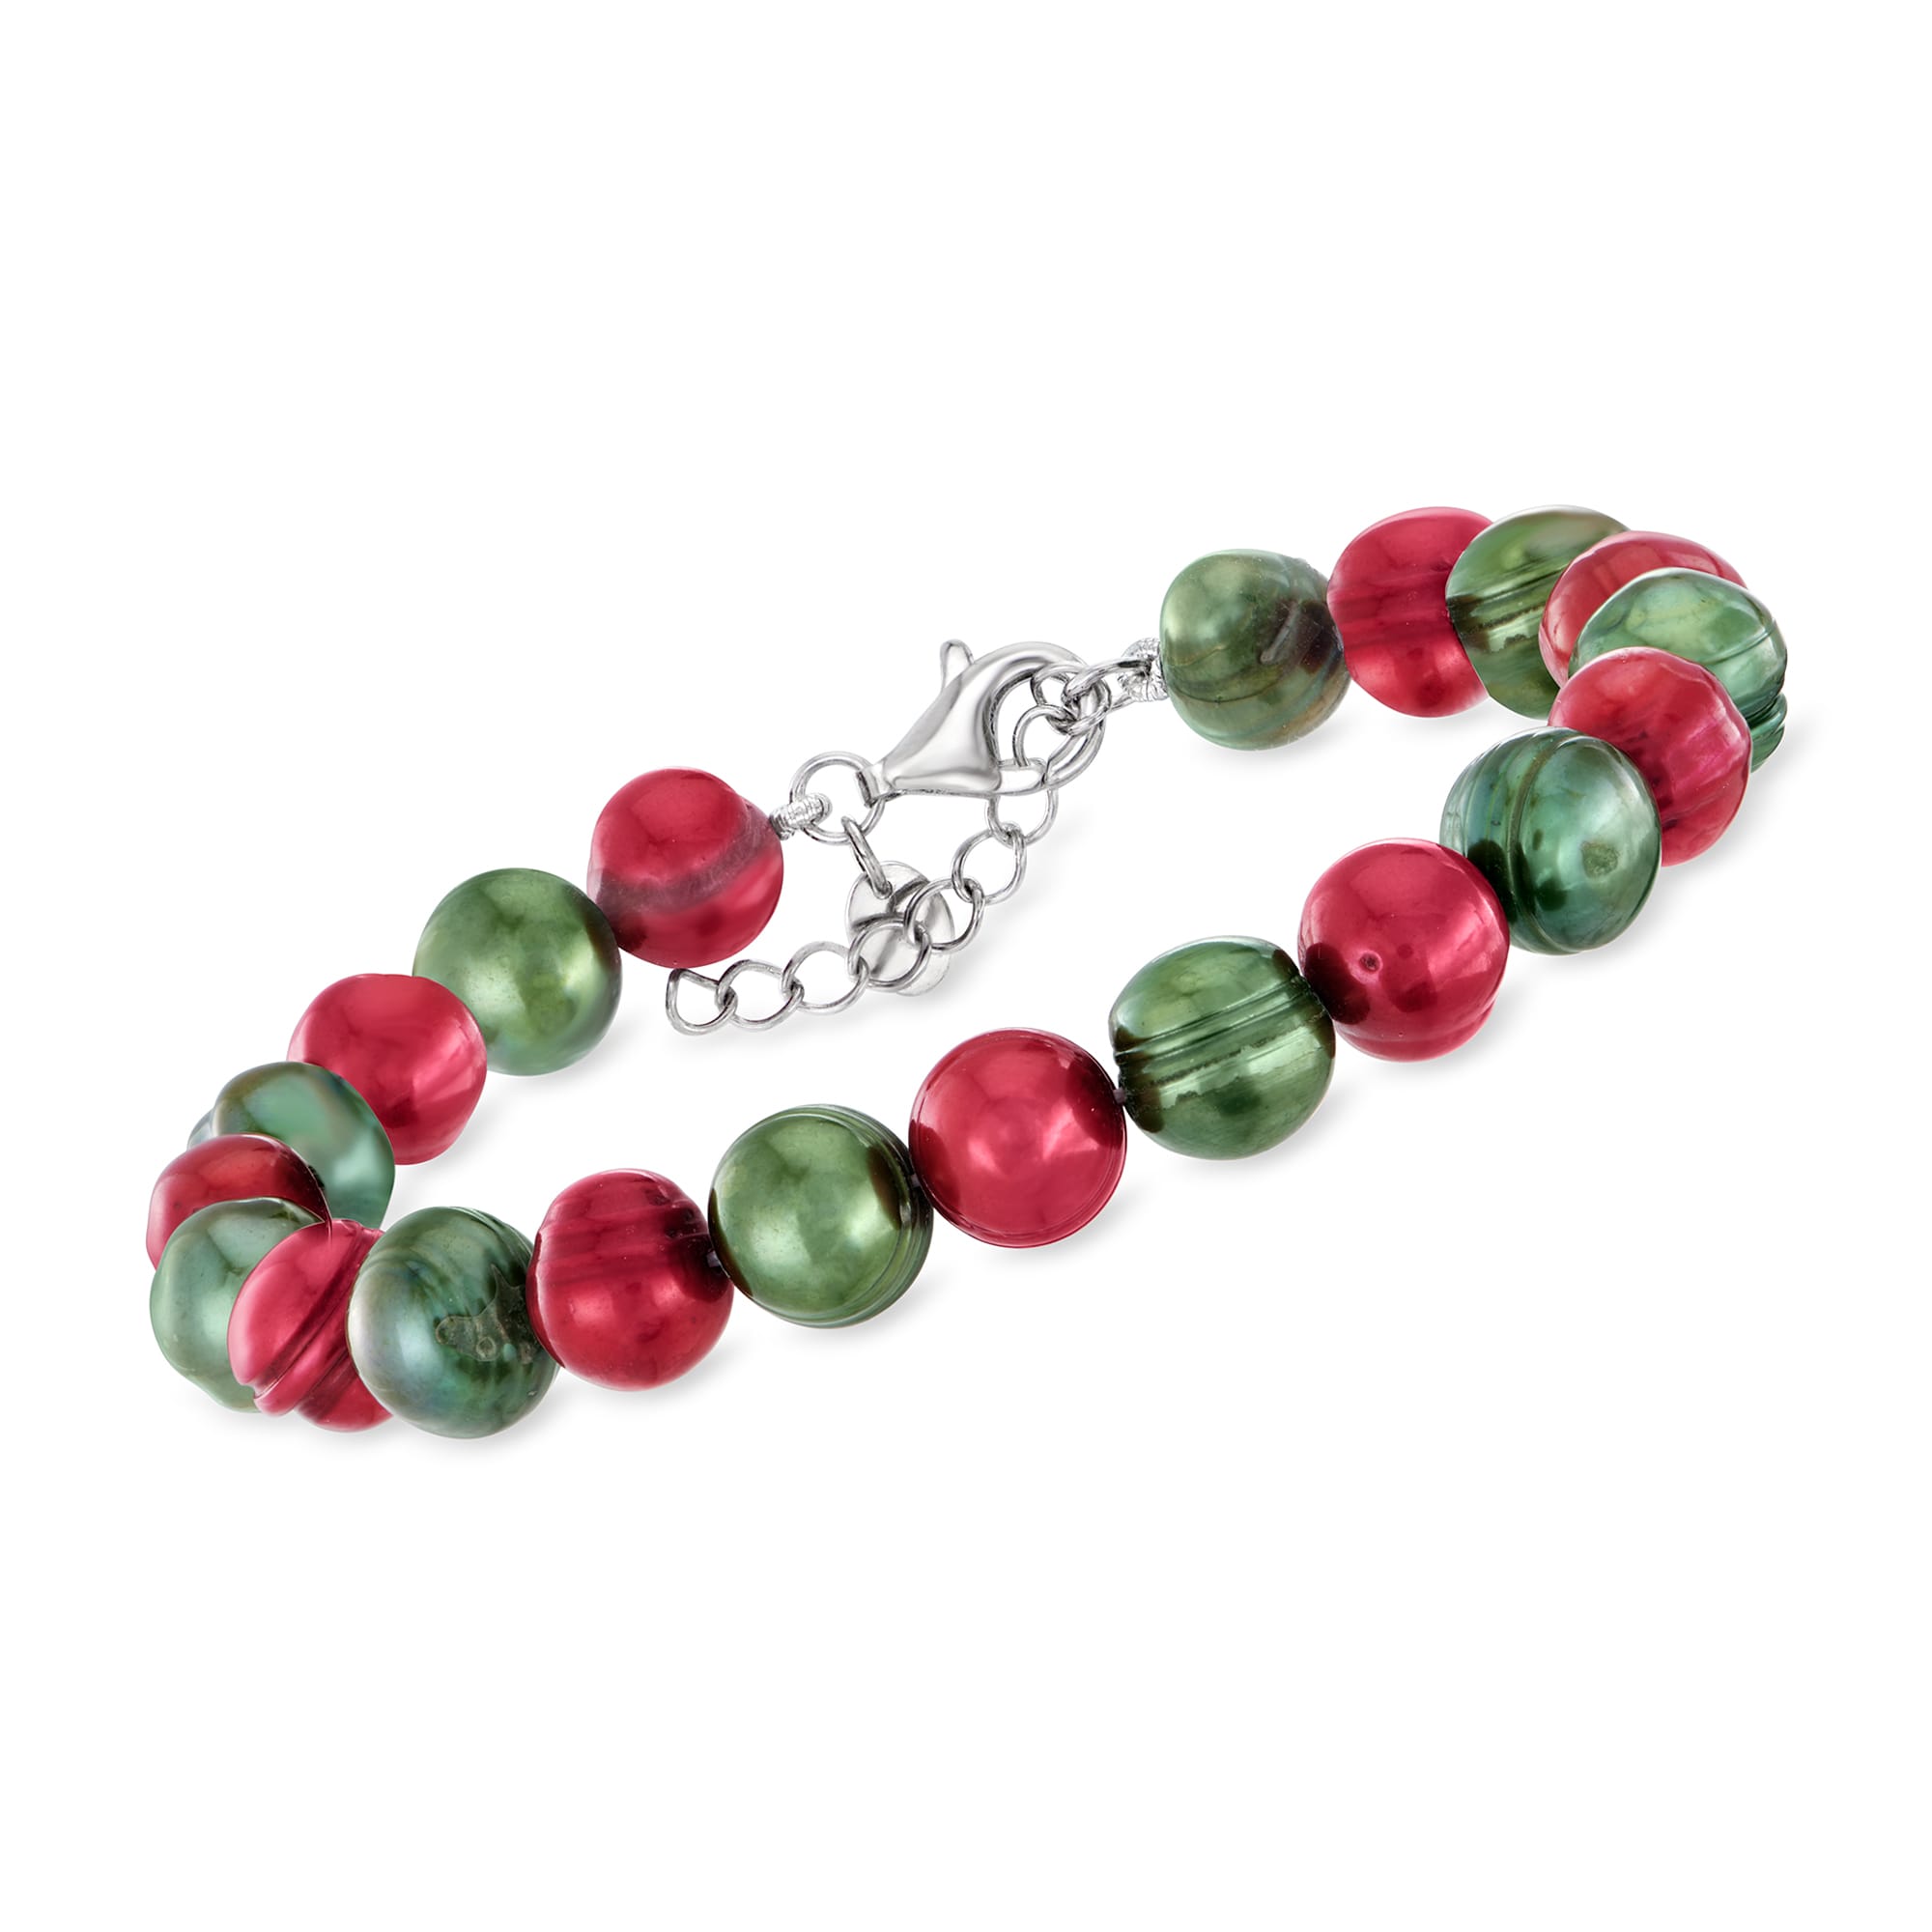 8-9mm Multicolored Cultured Pearl Jewelry Set: Necklace and Bracelet in  Sterling Silver. 18